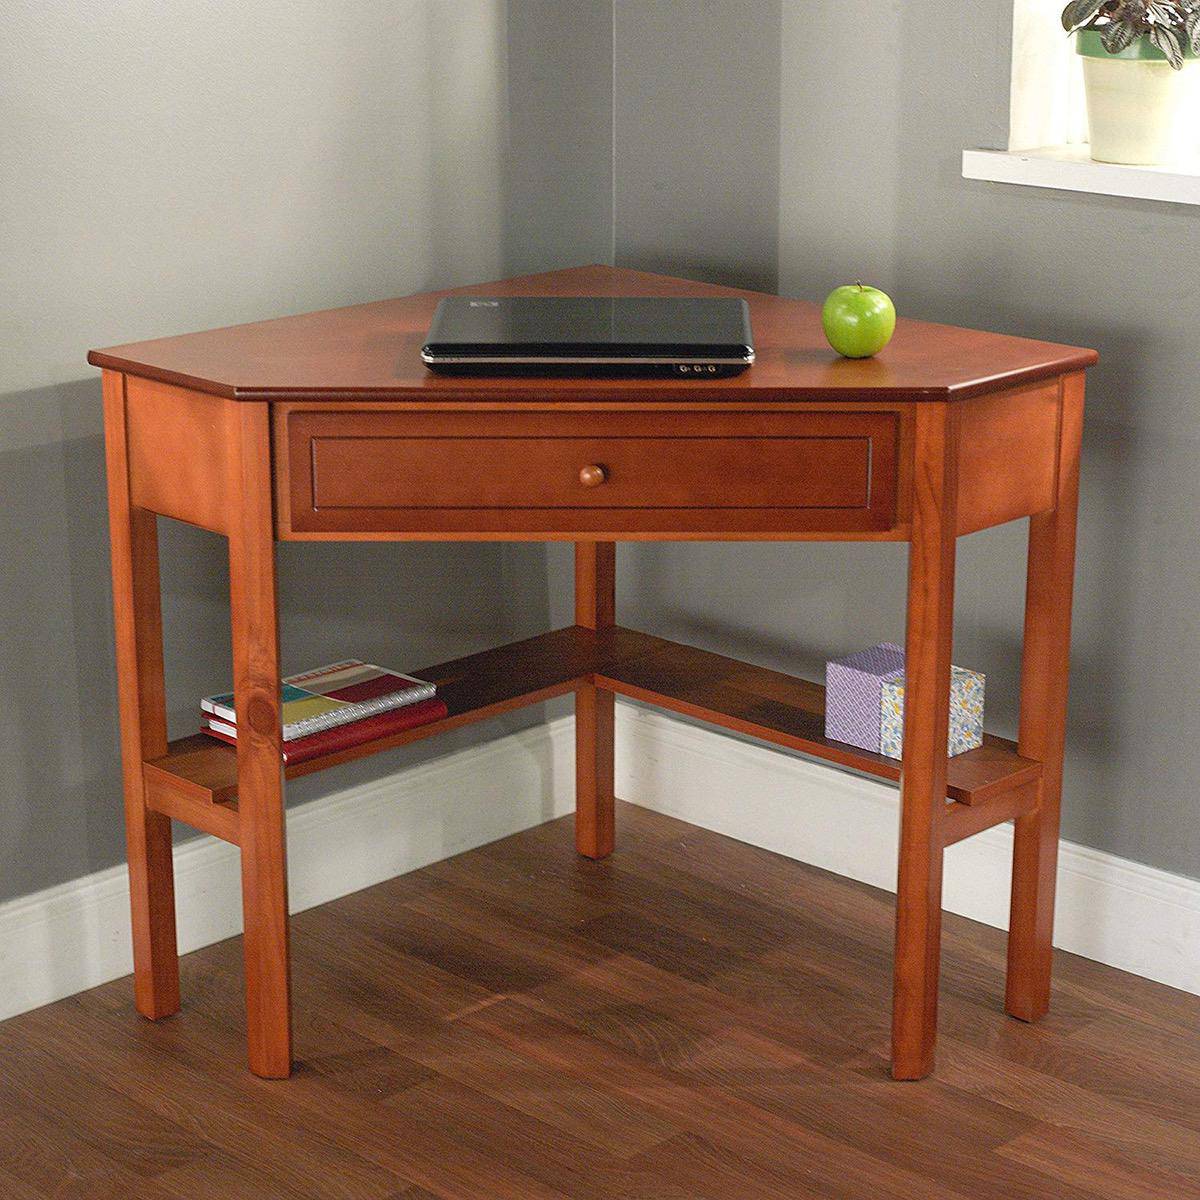 Save Your Space with This Corner Writing Desk